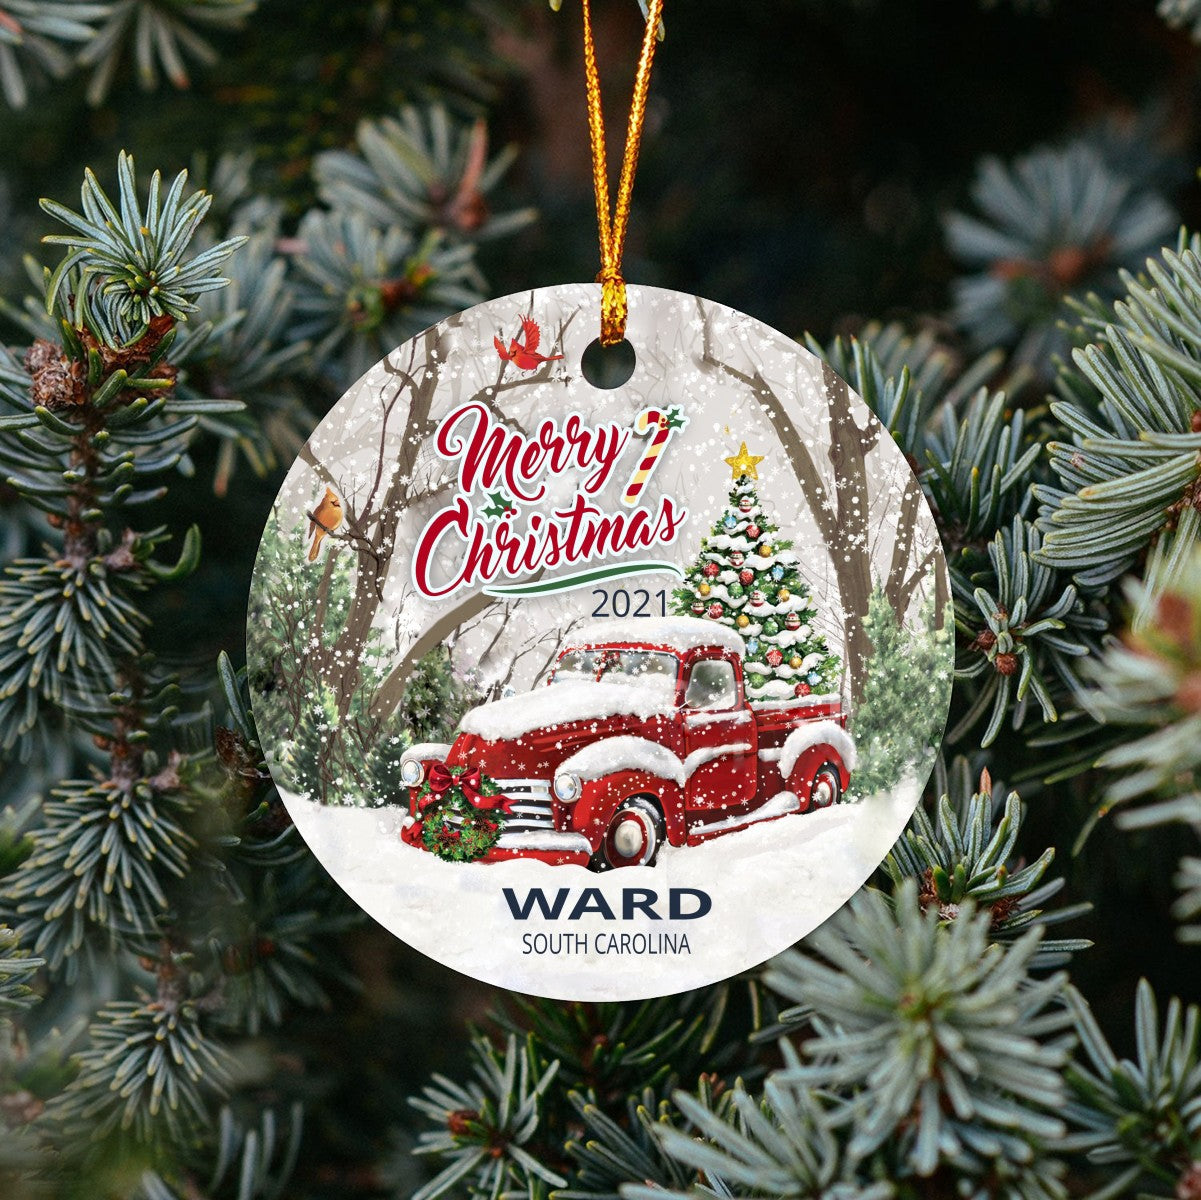 Christmas Tree Ornaments Ward - Ornament With Name City, State Ward South Carolina SC Ornament - Red Truck Xmas Ornaments 3'' Plastic Gift For Family, Friend And Housewarming